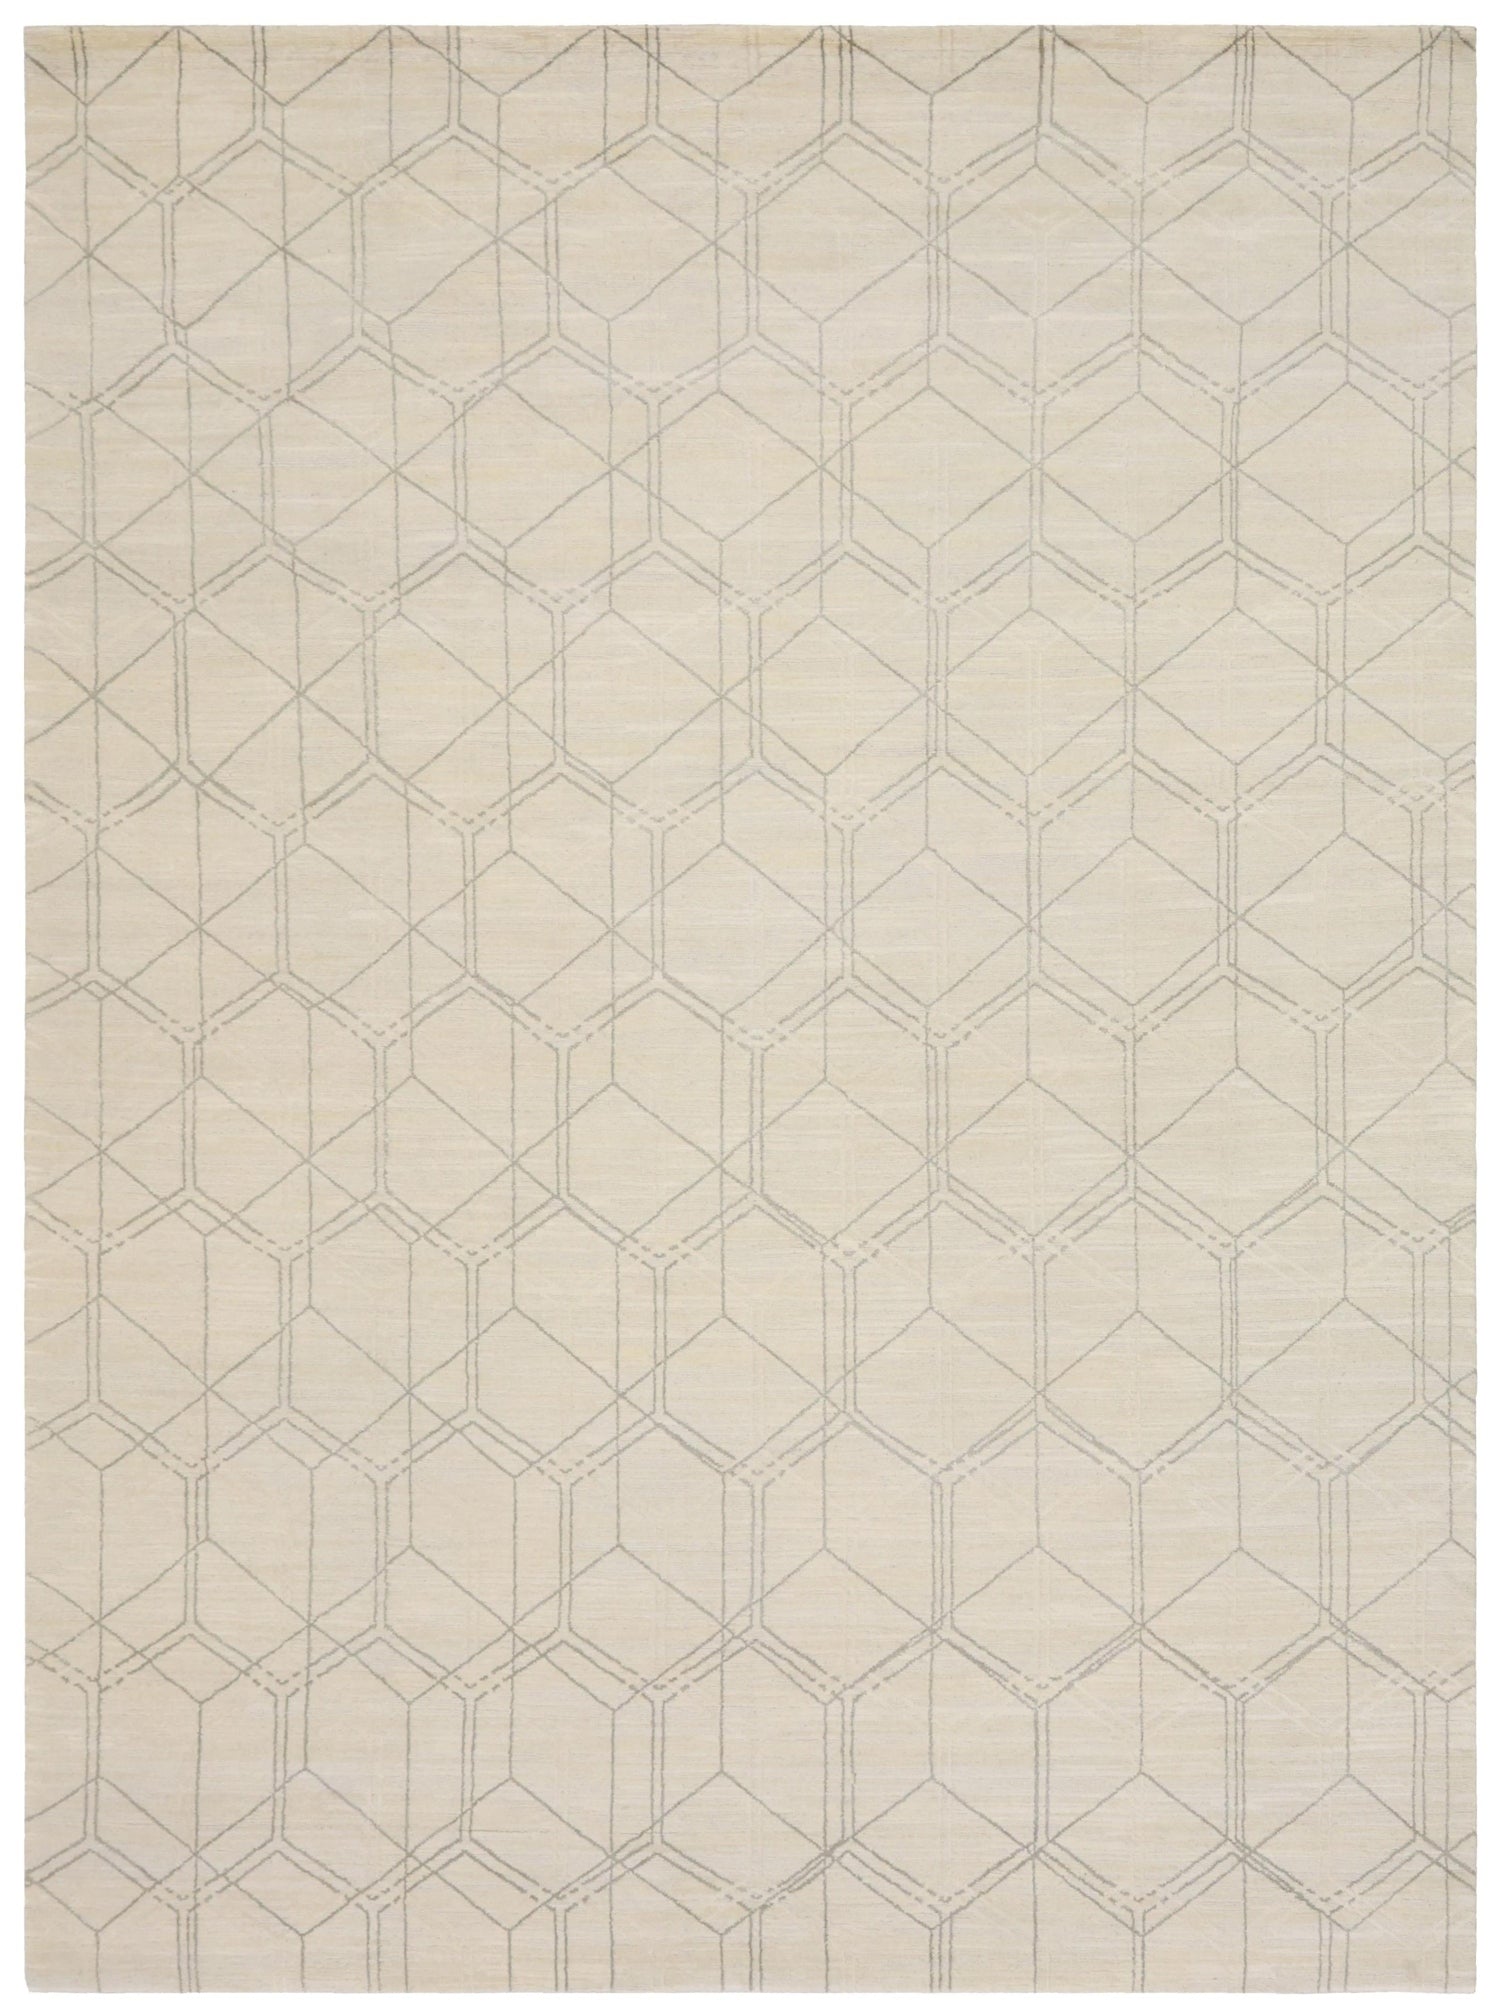 Foursquare Handwoven Transitional Rug